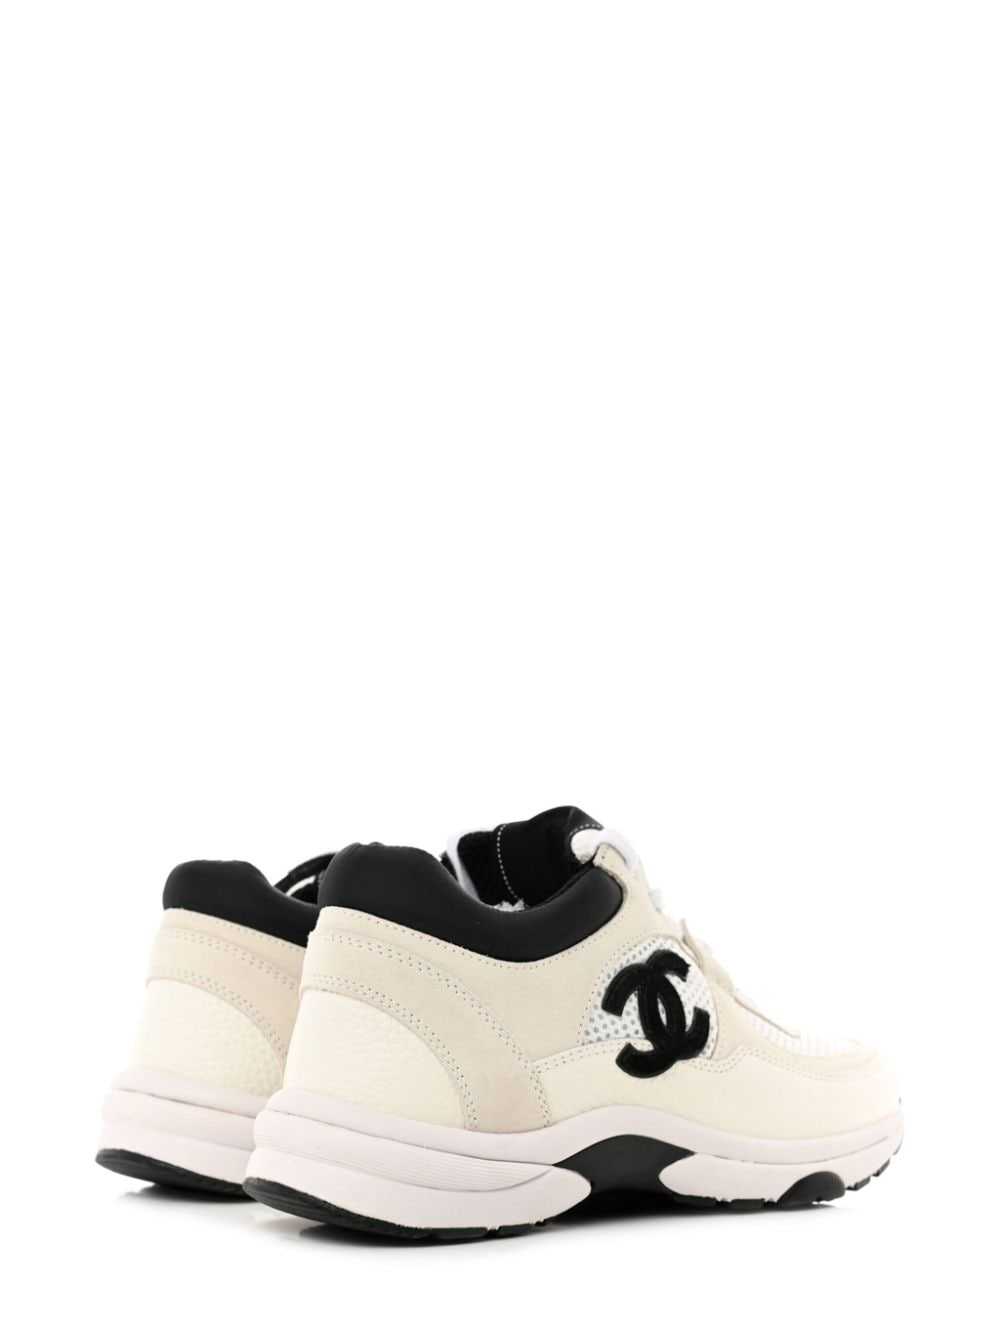 CHANEL Pre-Owned CC suede lace-up sneakers - White - image 3